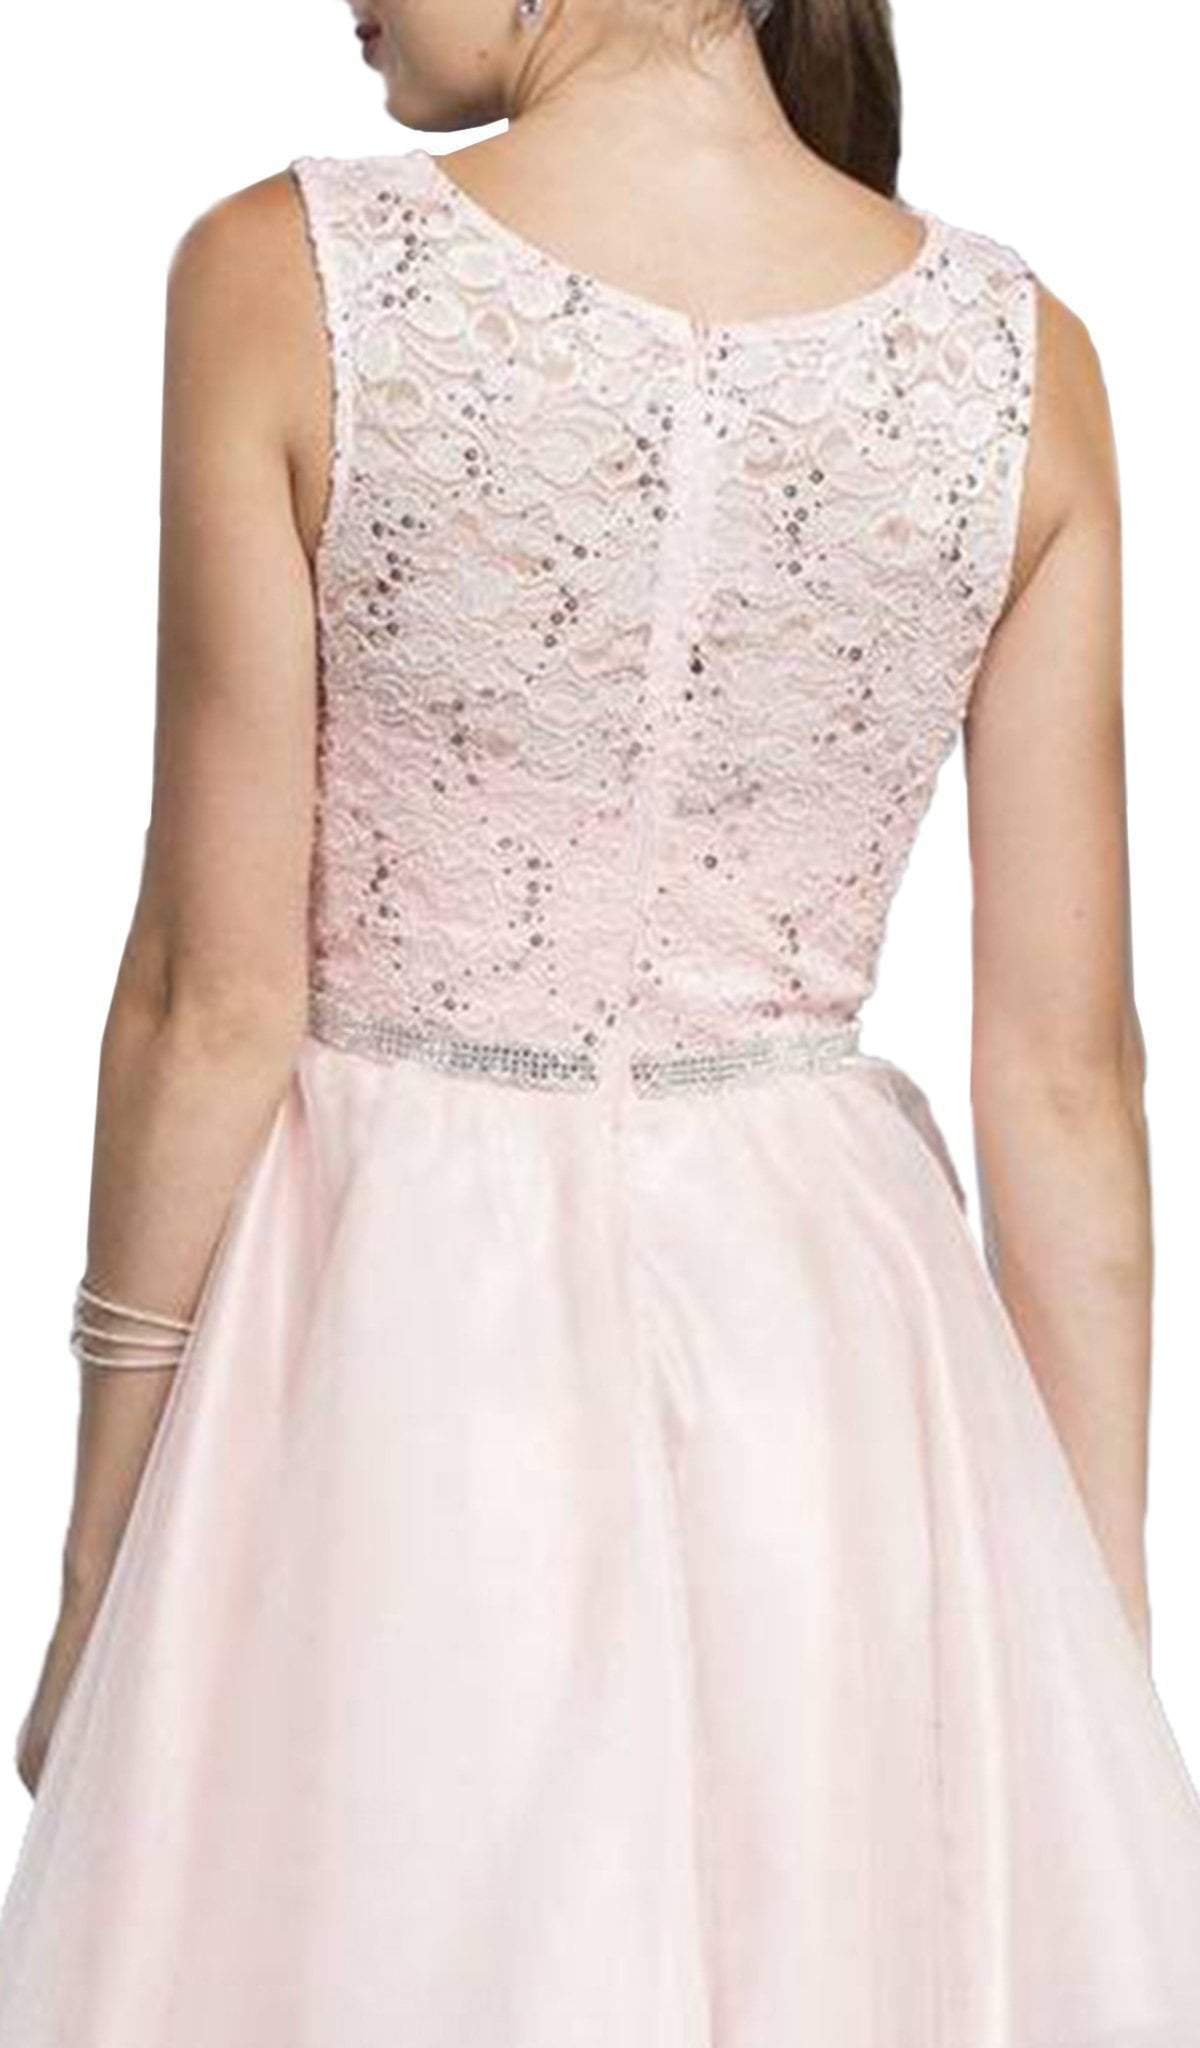 Sleeveless Lace and Tulle Cocktail Dress Homecoming Dresses